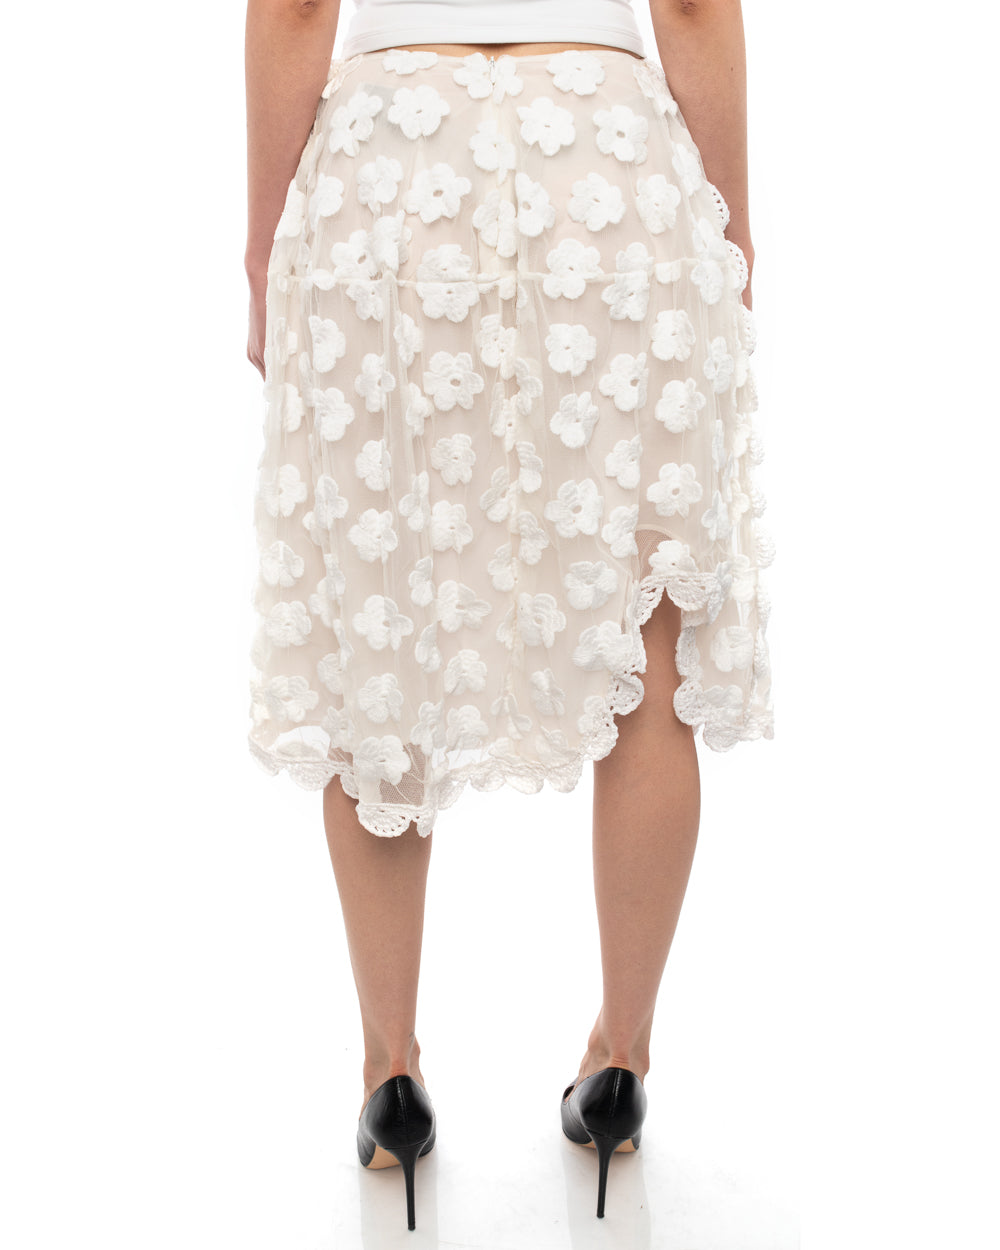 Simone Rocha White Floral Crochet Mesh Overlay Skirt.  Below knee length full skirt with raised hemline at left knee, silk lined, no waistband.  Marked size UK6 (USA 2) but can fit a USA 4/6 as waist measures 27”, total length is 26”.  Our model is 5’10” without heels. 65% cotton, 32 polyamide, 3 poly.  Crochet is 100% poly and lining is 100% silk.  Excellent preowned condition.